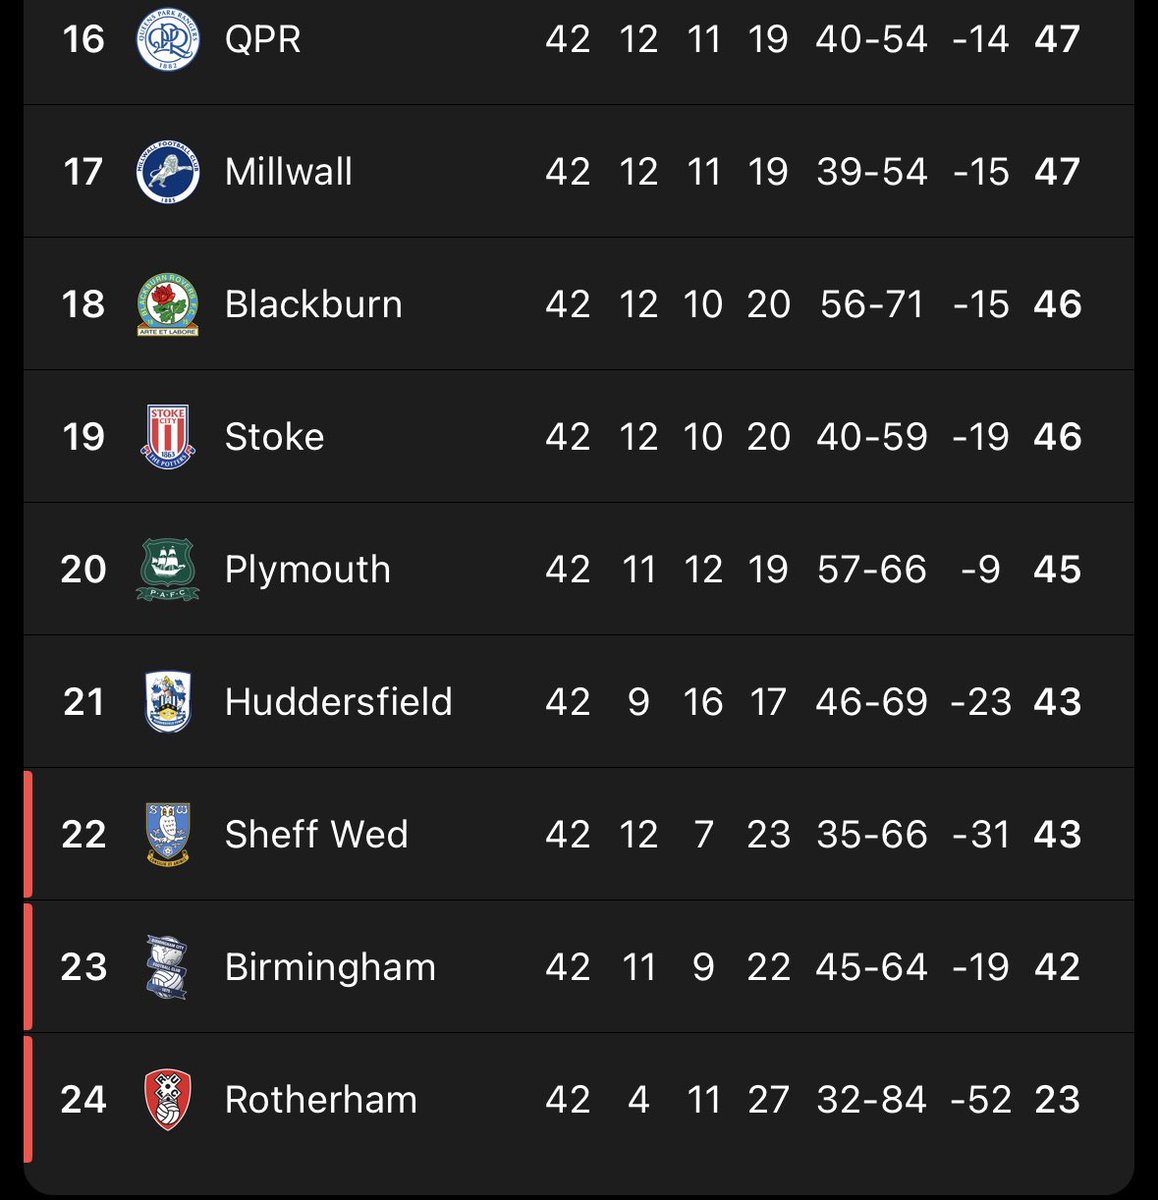 This relegation battle in the Championship could go down as one for the ages with four games left to play.